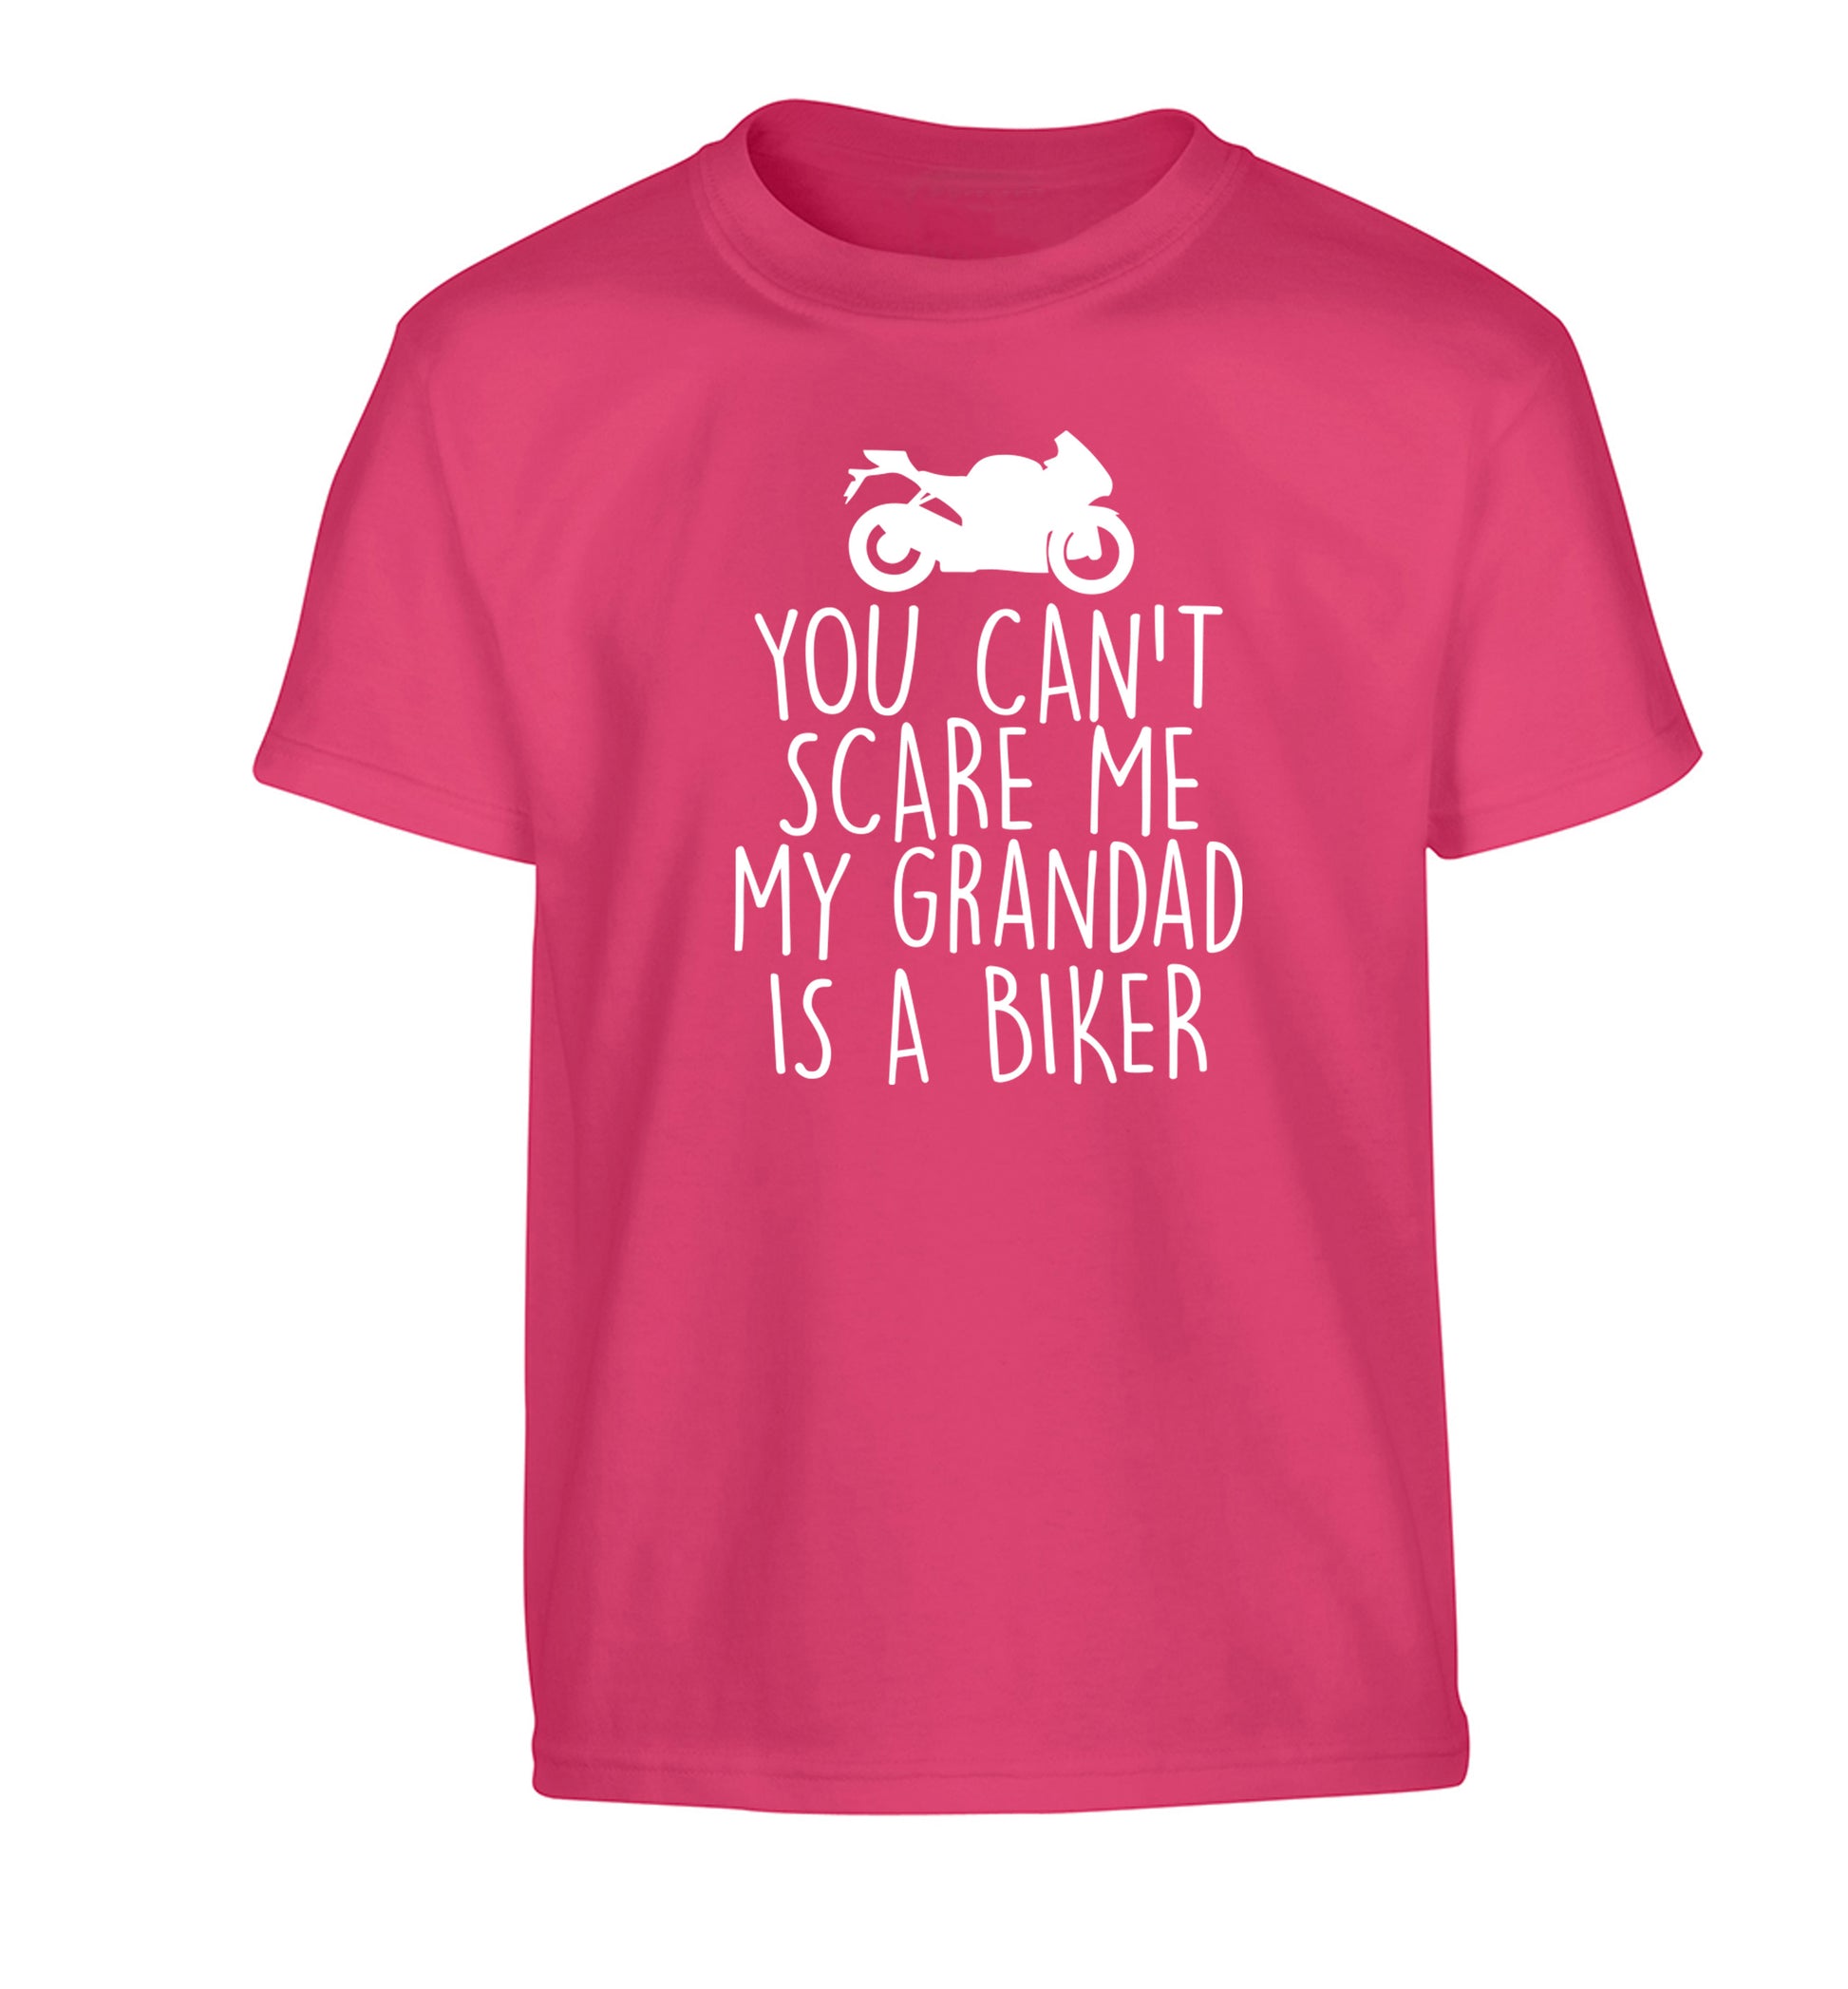 You can't scare me my grandad is a biker Children's pink Tshirt 12-13 Years